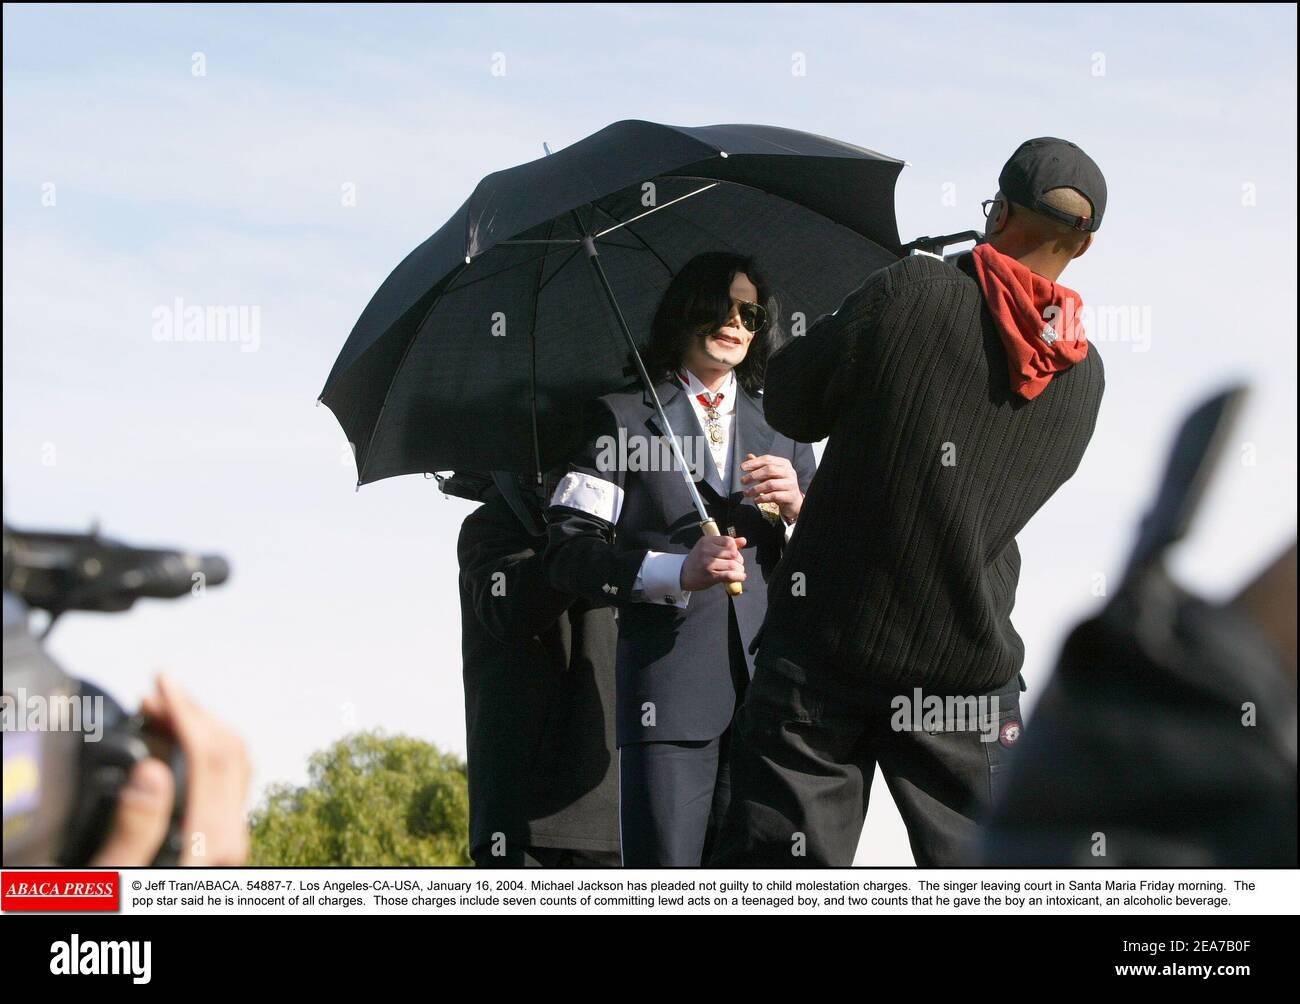 © Jeff Tran/ABACA. 54887-7. Los Angeles-CA-USA, January 16, 2004. Michael Jackson has pleaded not guilty to child molestation charges. The singer leaving court in Santa Maria Friday morning. The pop star said he is innocent of all charges. Those charges include seven counts of committing lewd acts on a teenaged boy, and two counts that he gave the boy an intoxicant, an alcoholic beverage. Stock Photo